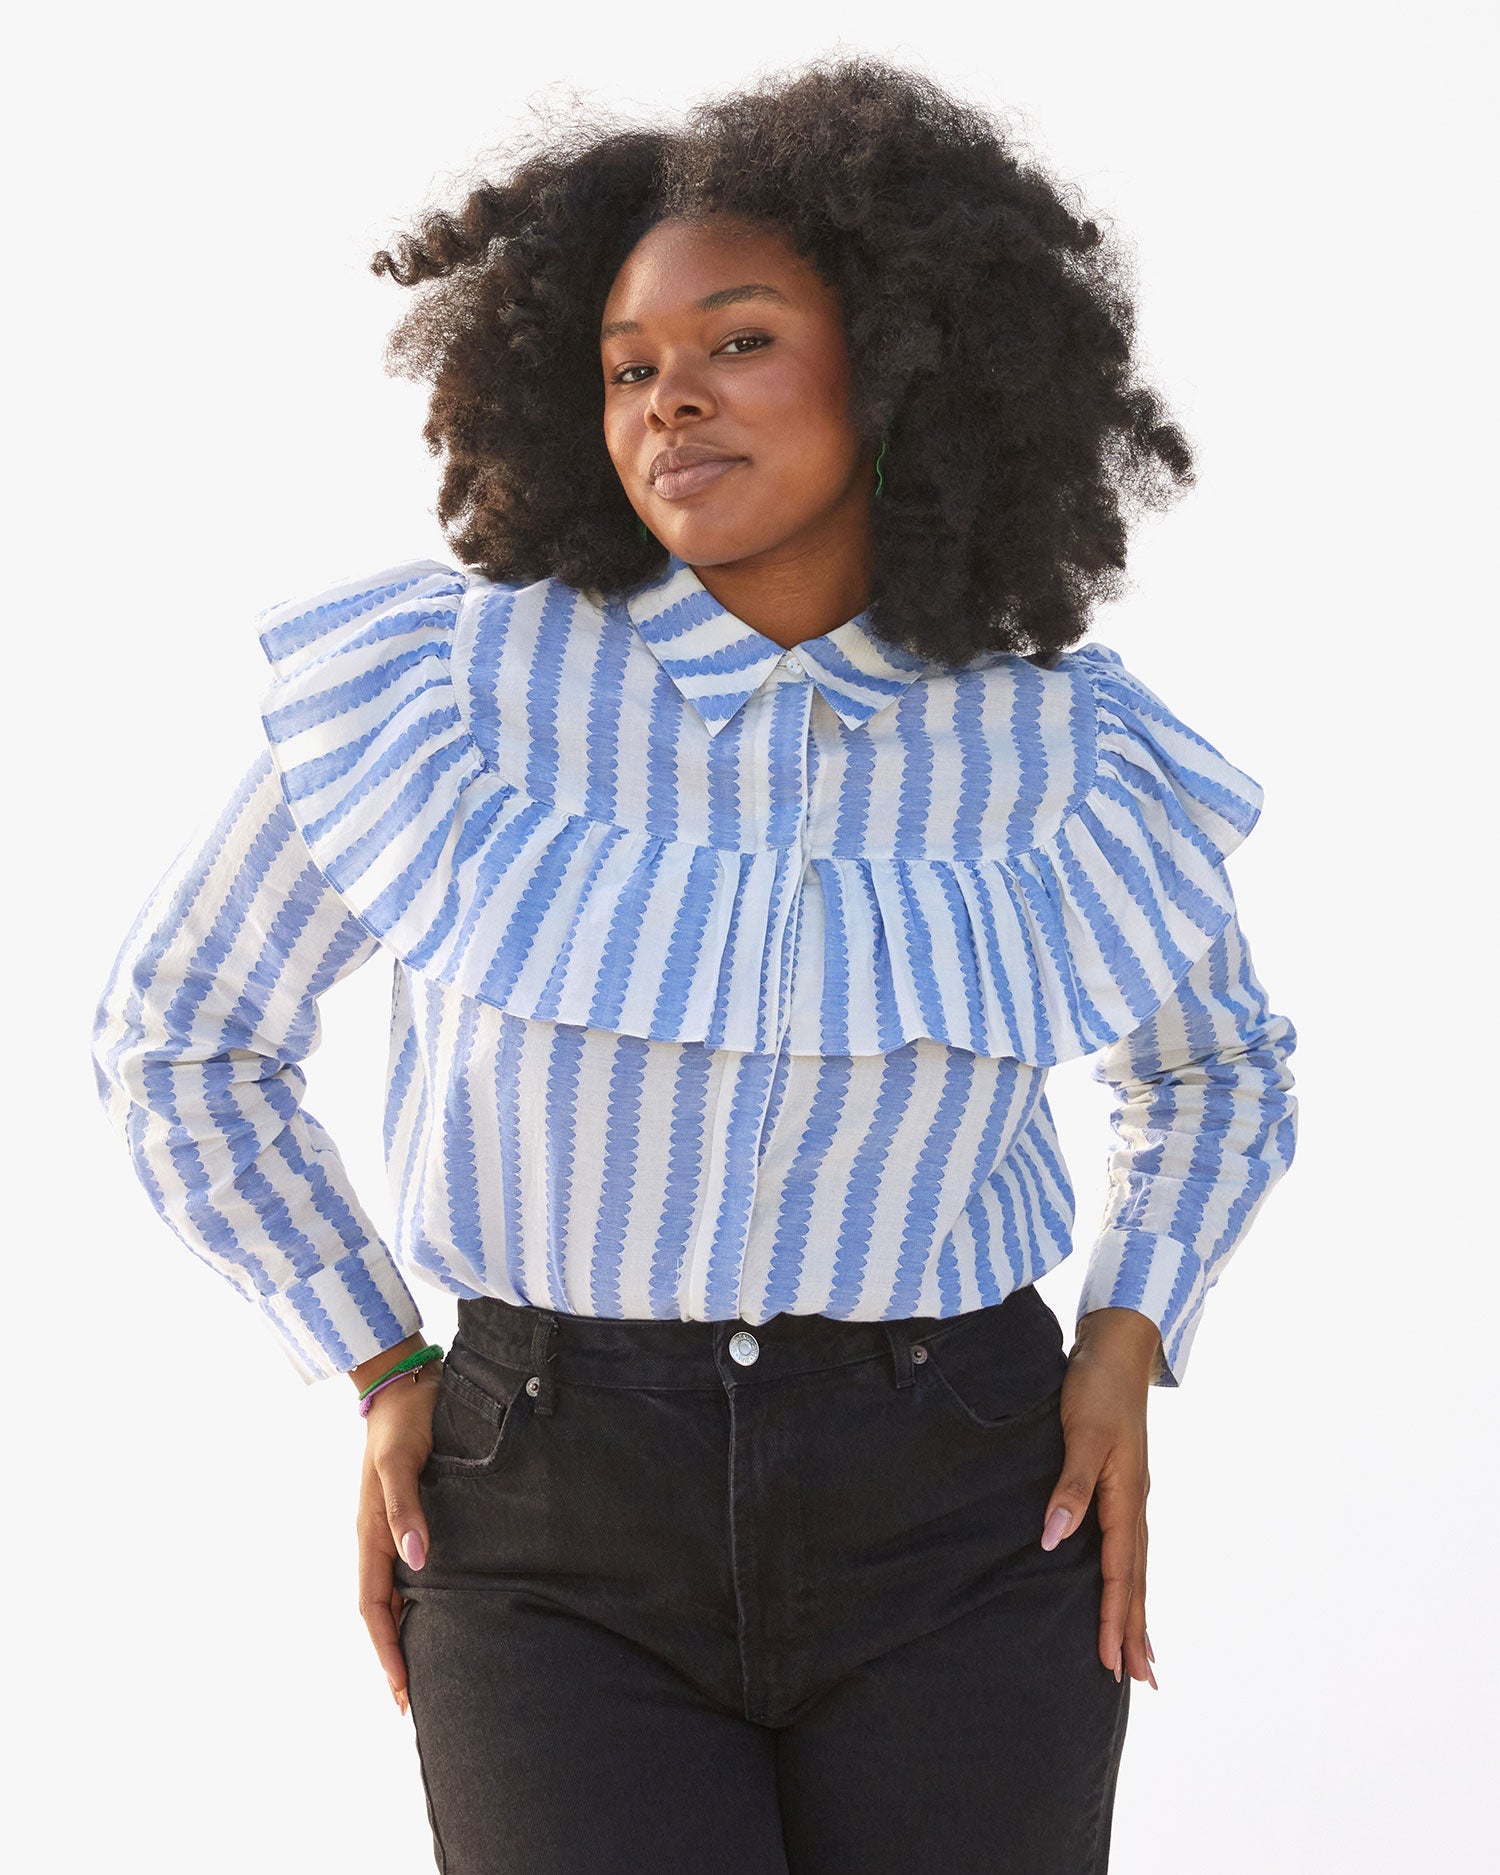 candace wearing the Blue and cream scallop stripe charlotte blouse all the way buttoned up and tucked in to black jeans